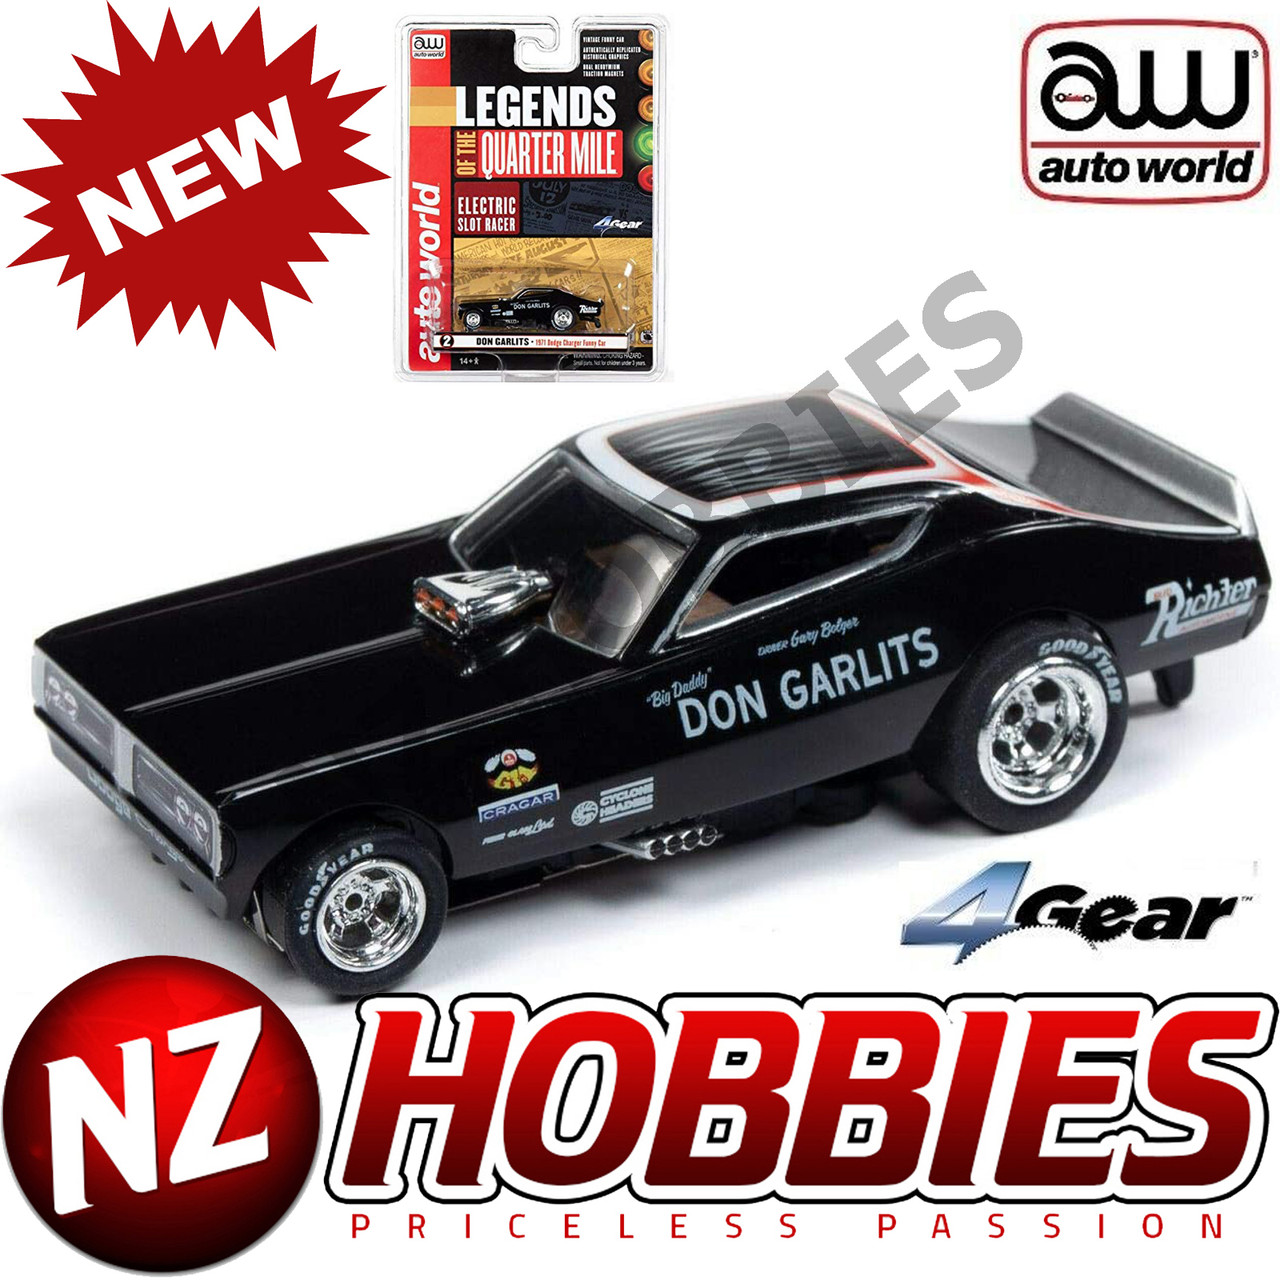 Auto World Legends Army 1973 Cuda Funny Car HO Scale ELECTRIC Slot Racer